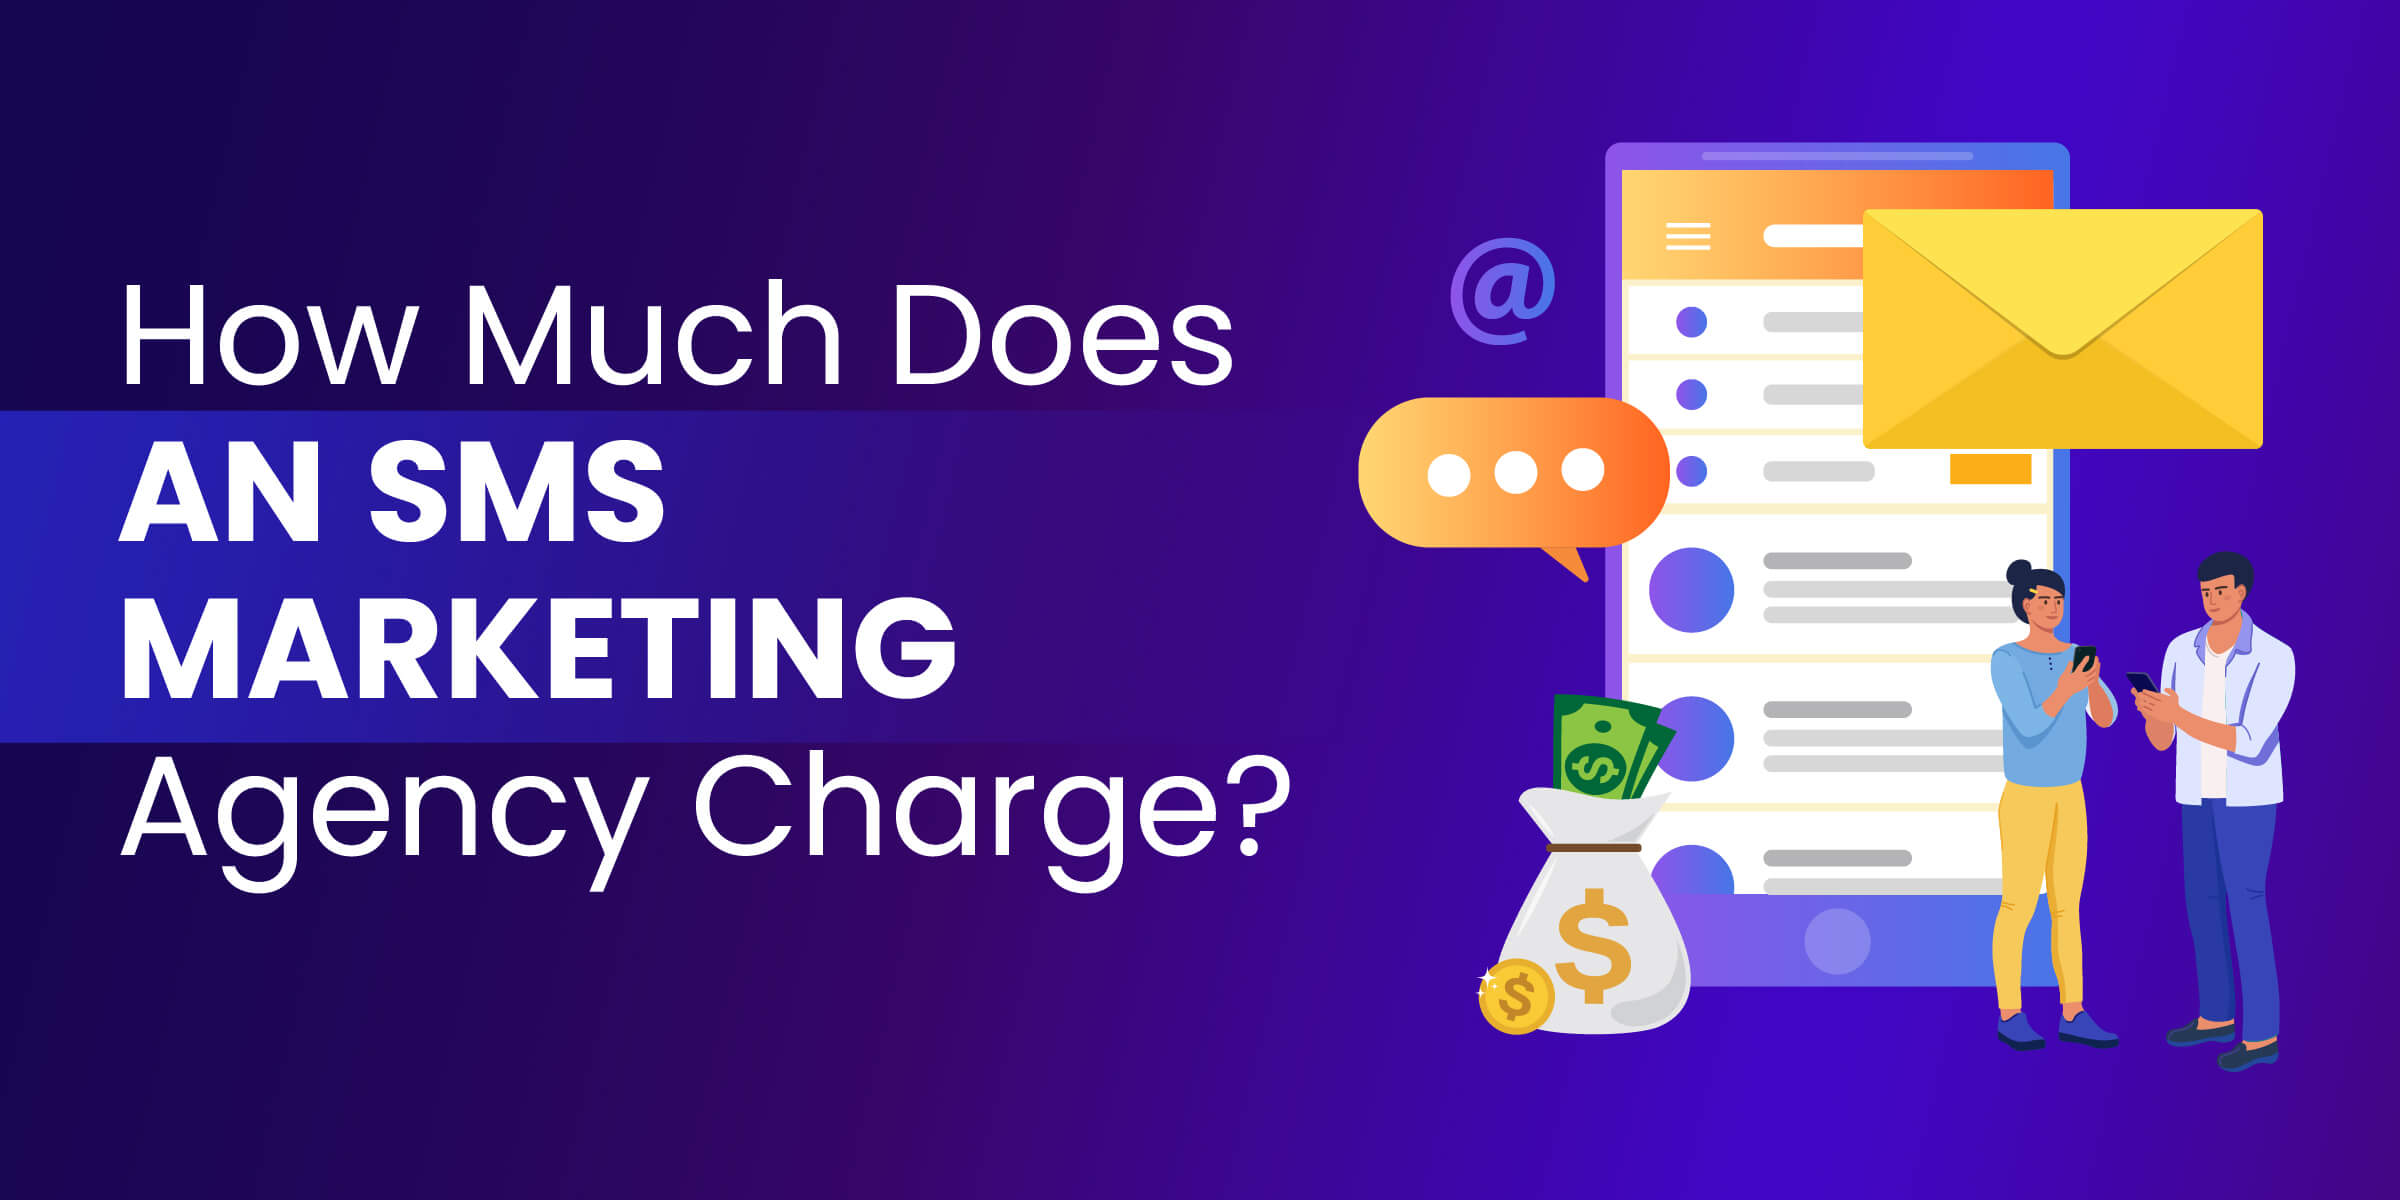 How Much Does an SMS Marketing Agency Charge